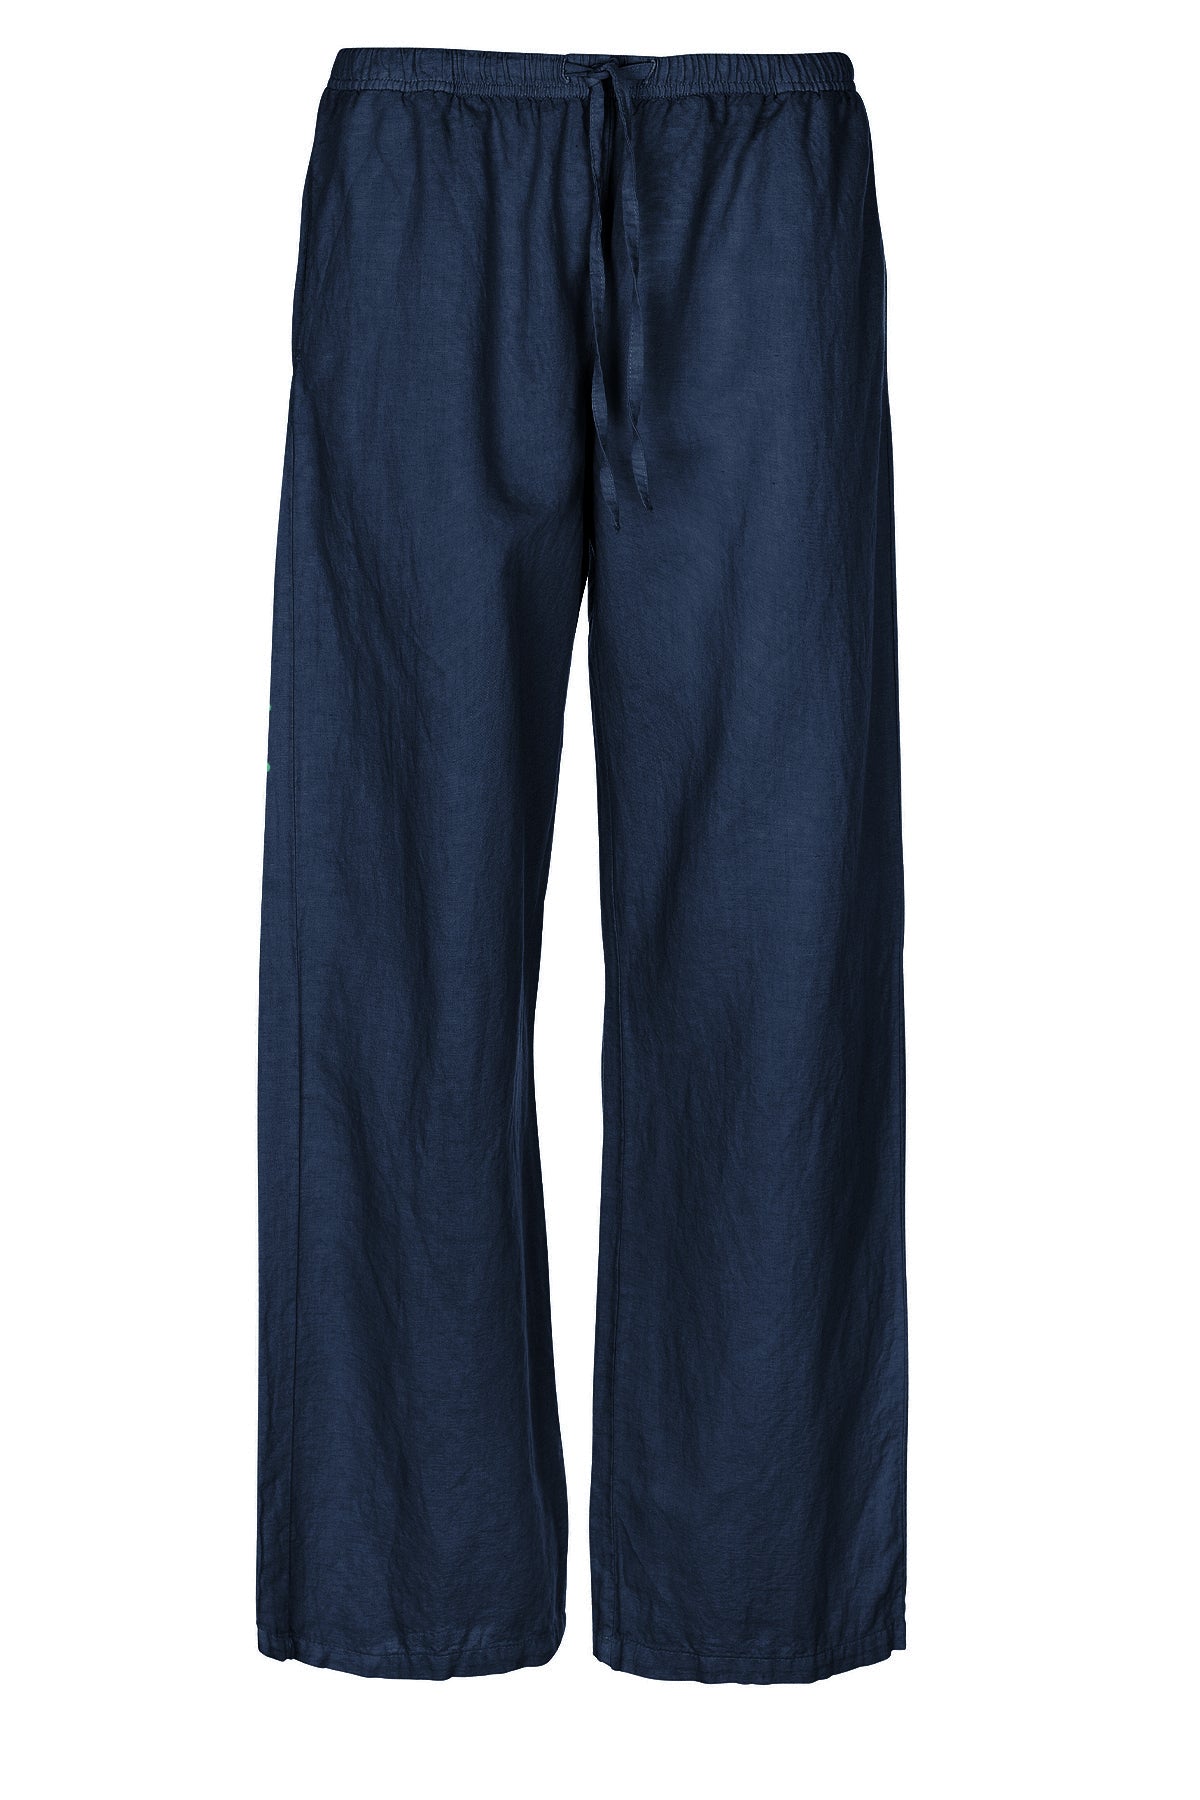 LUXZUZ // ONE TWO Elilin Pant Pant 575 Navy